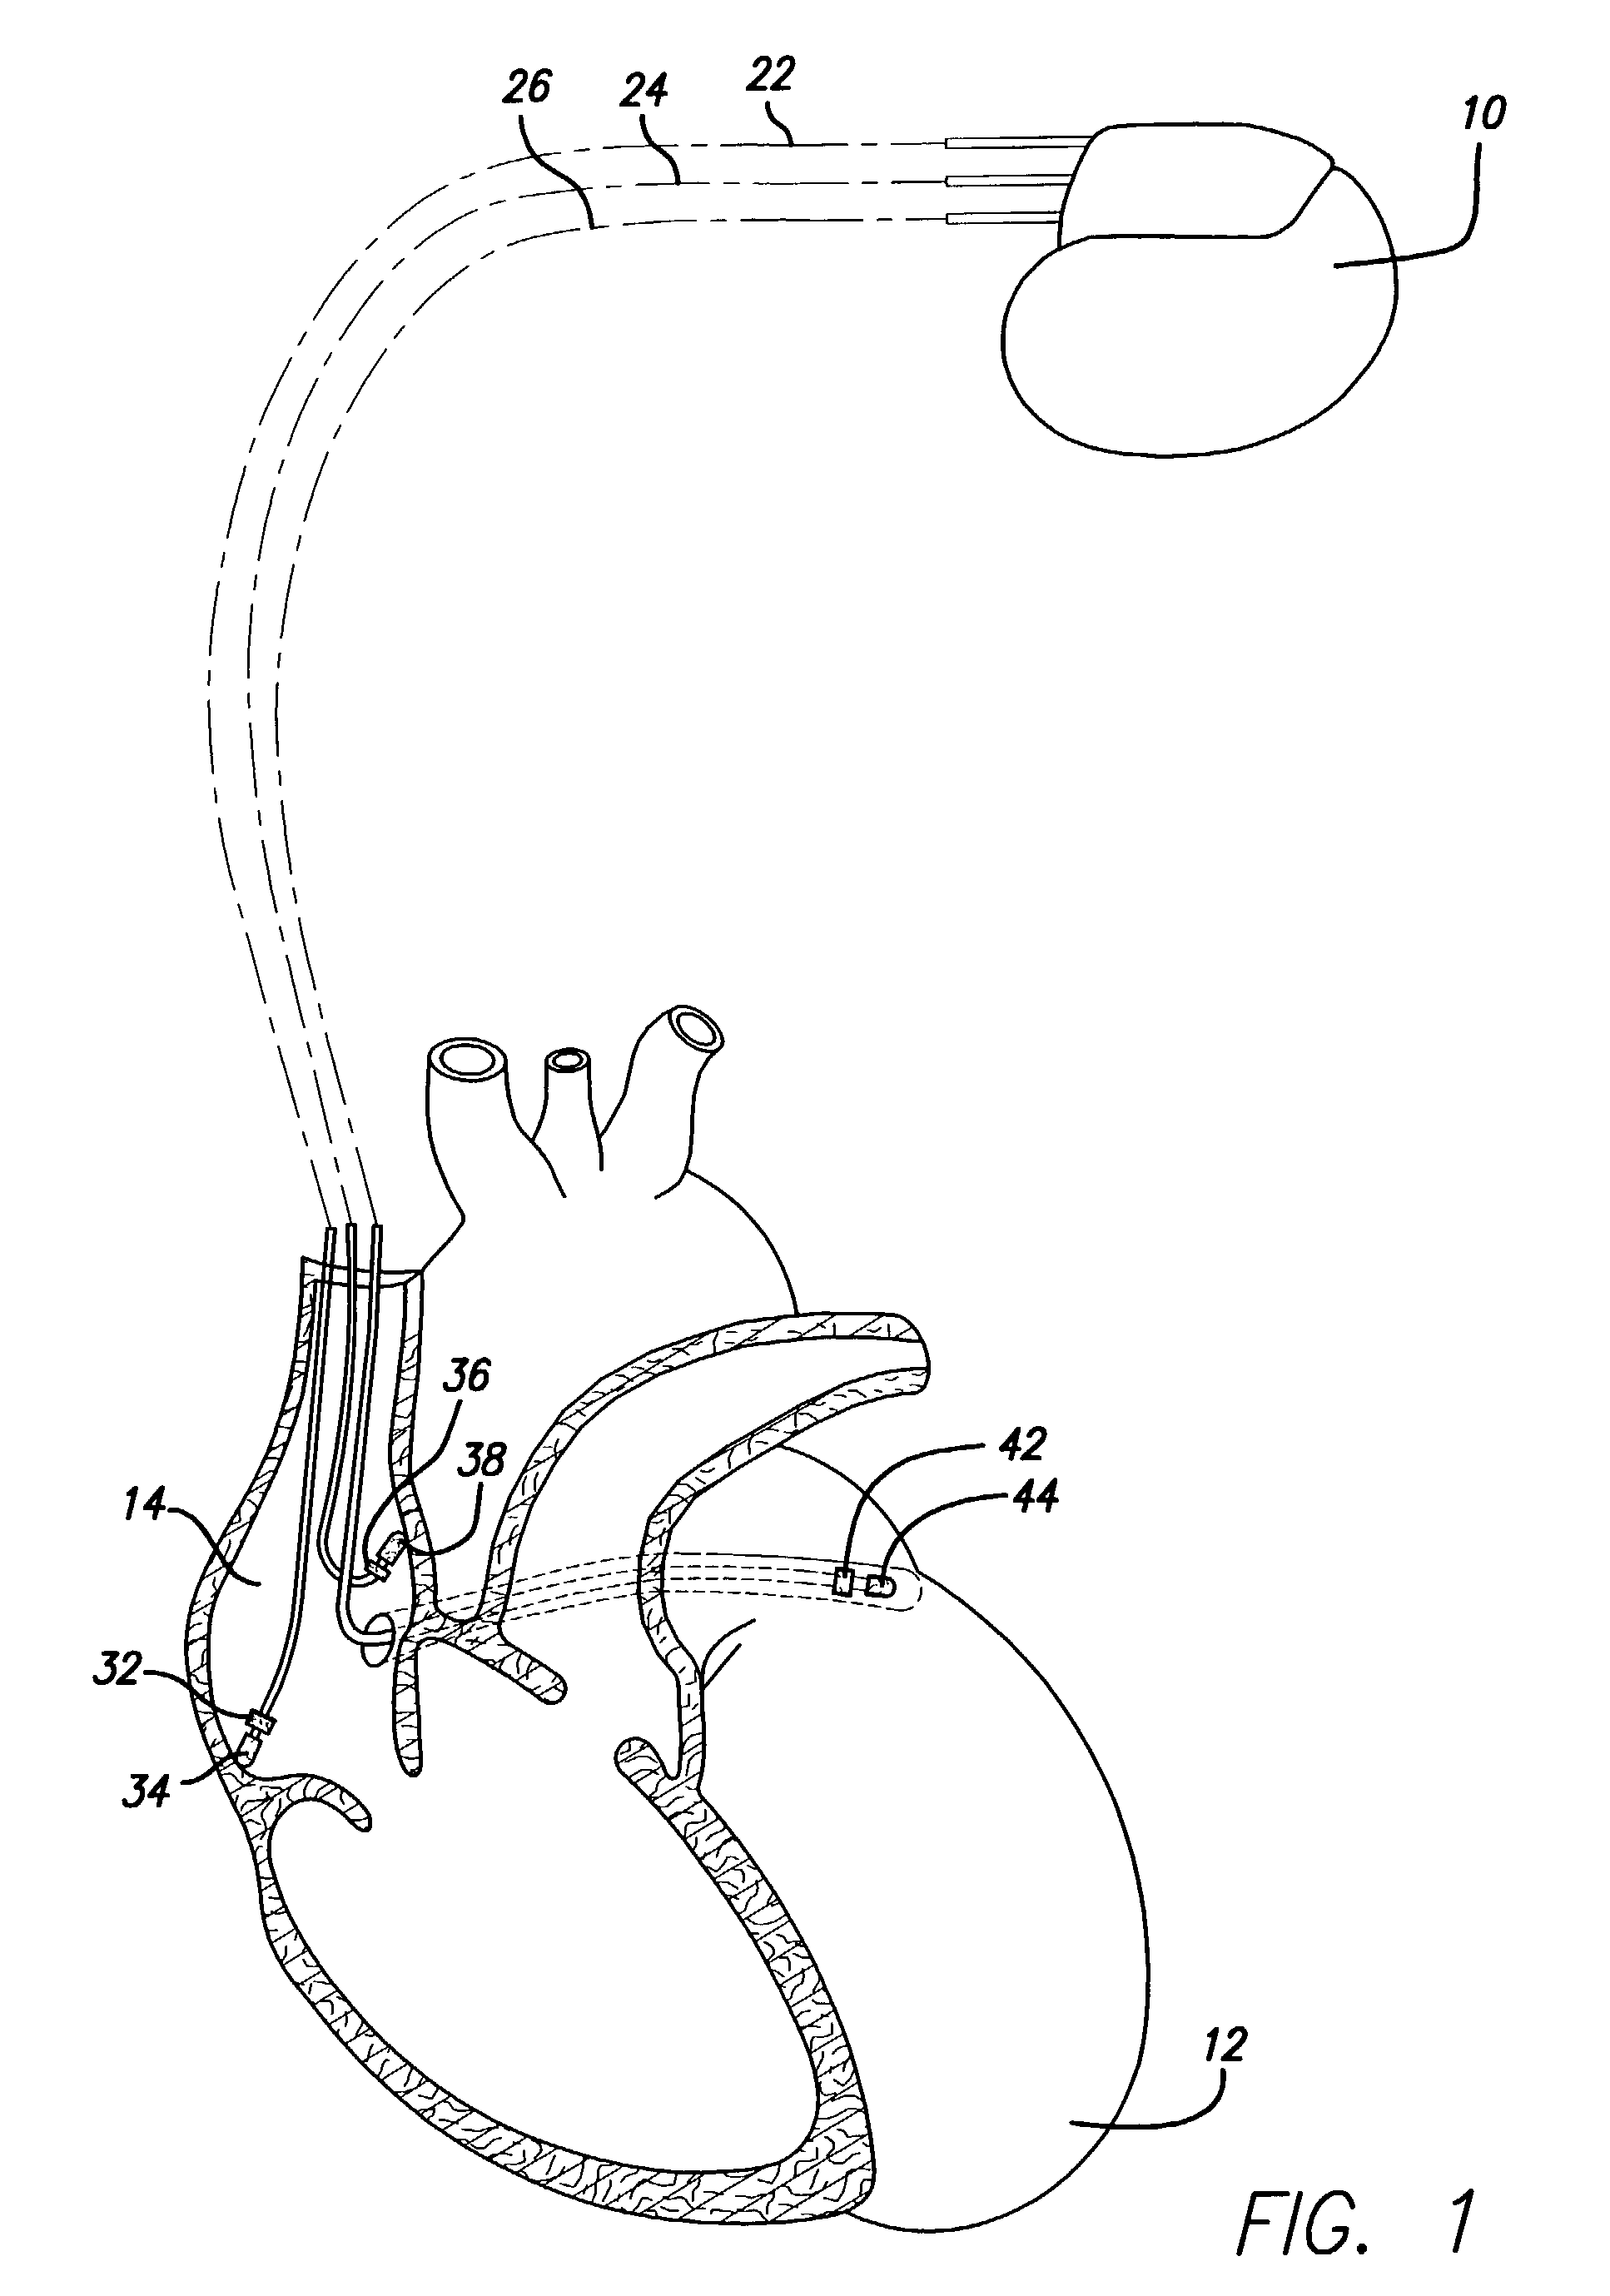 Methods and apparatus for overdrive pacing multiple atrial sites using an implantable cardiac stimulation device